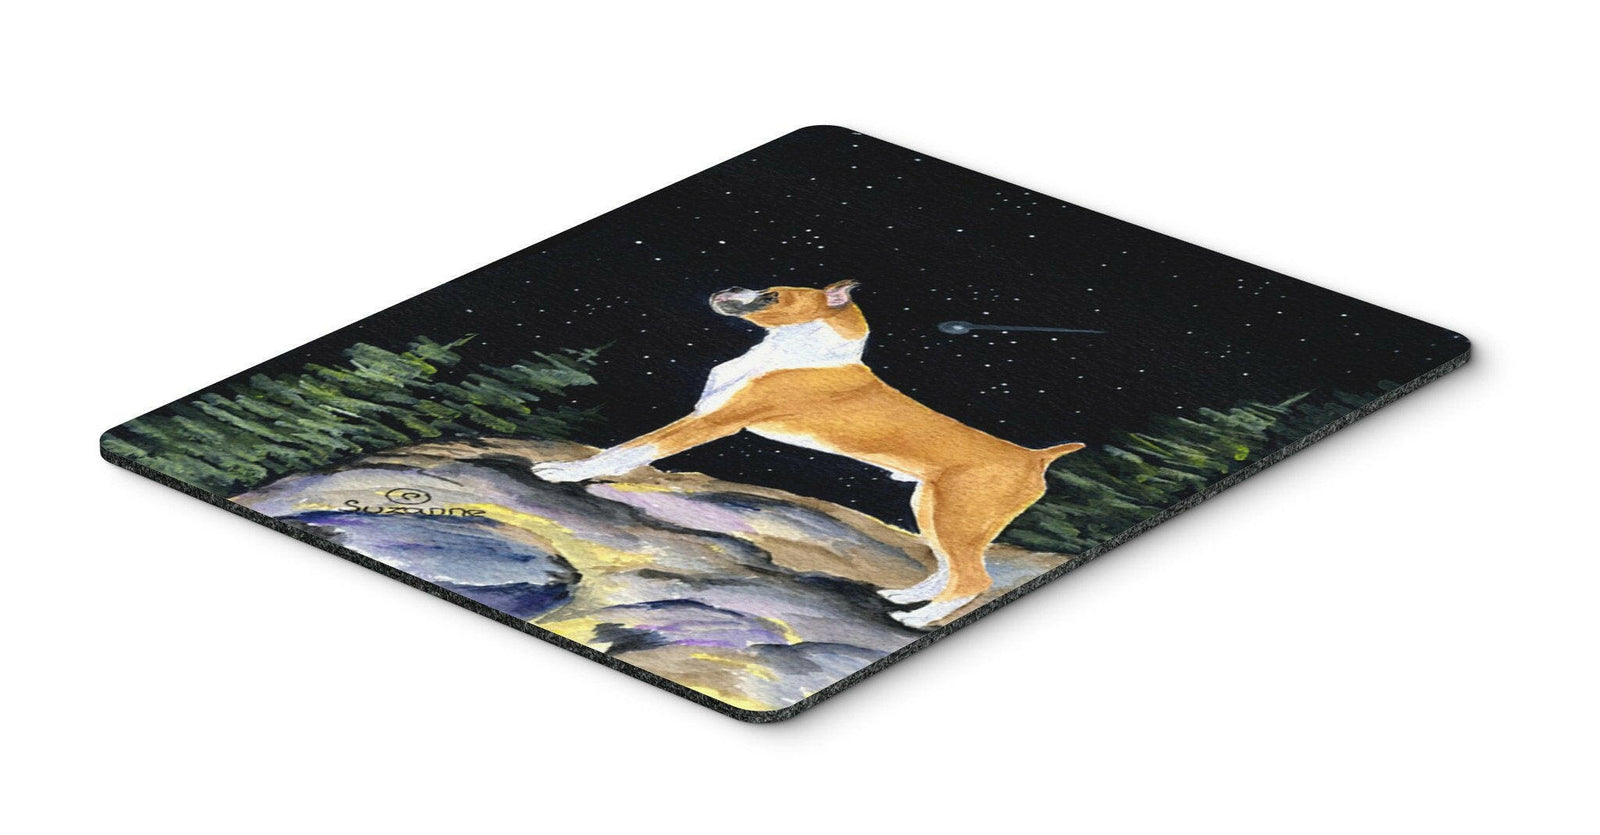 Starry Night Boxer Mouse Pad / Hot Pad / Trivet by Caroline's Treasures